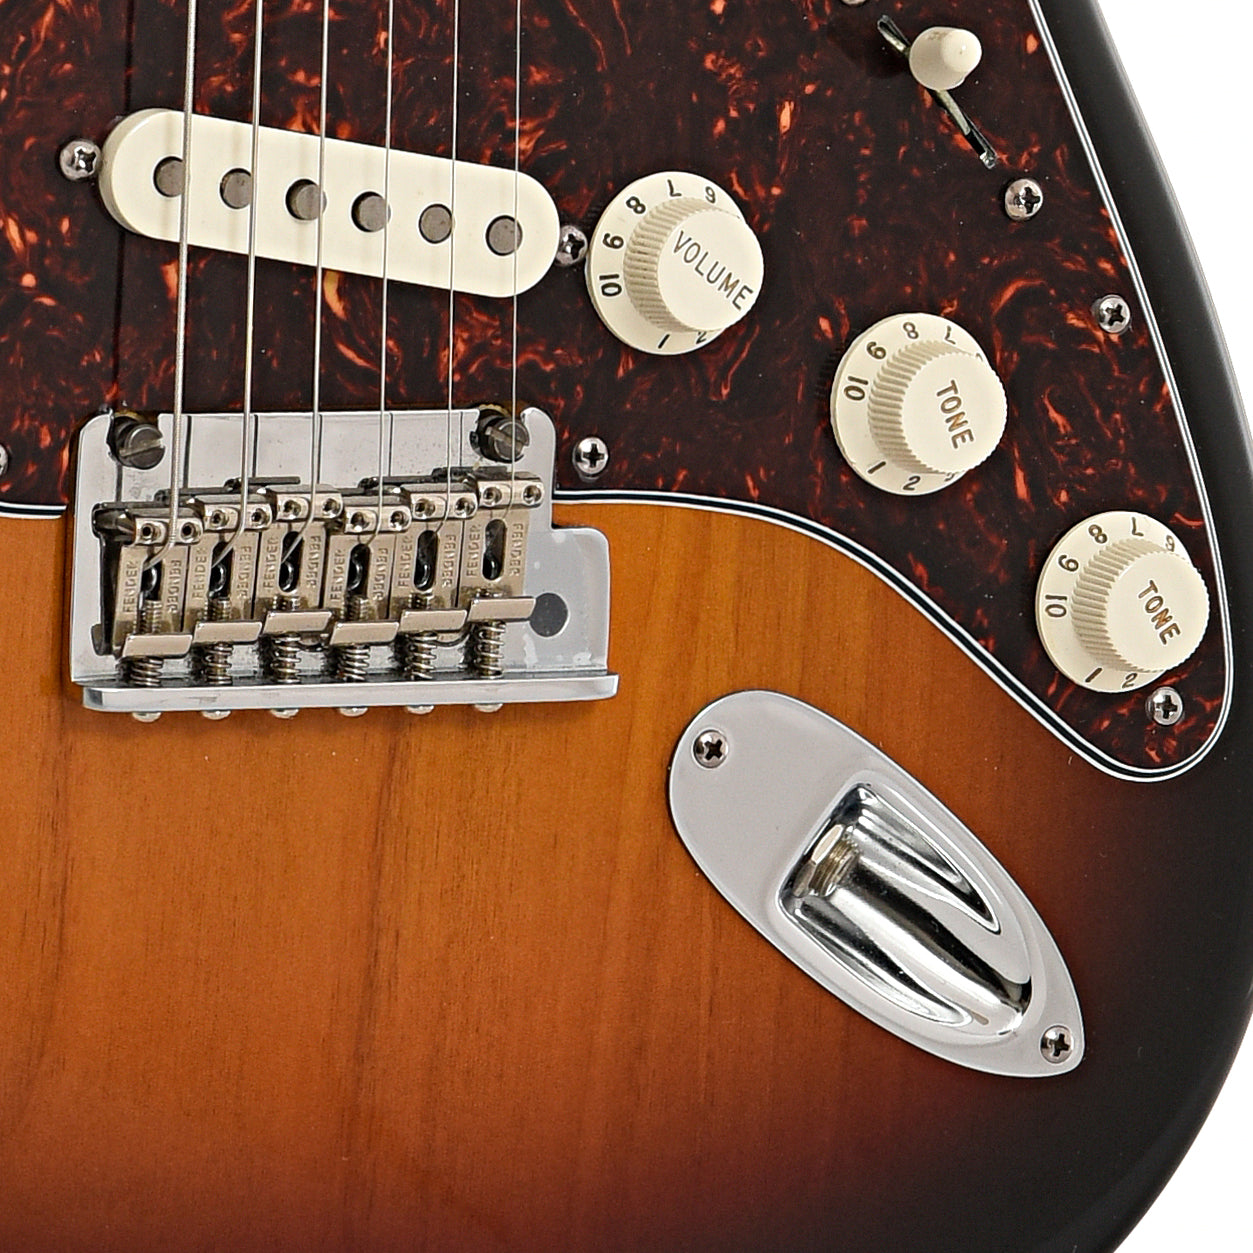 Bridge and controls of Fender New American Standard Stratocaster